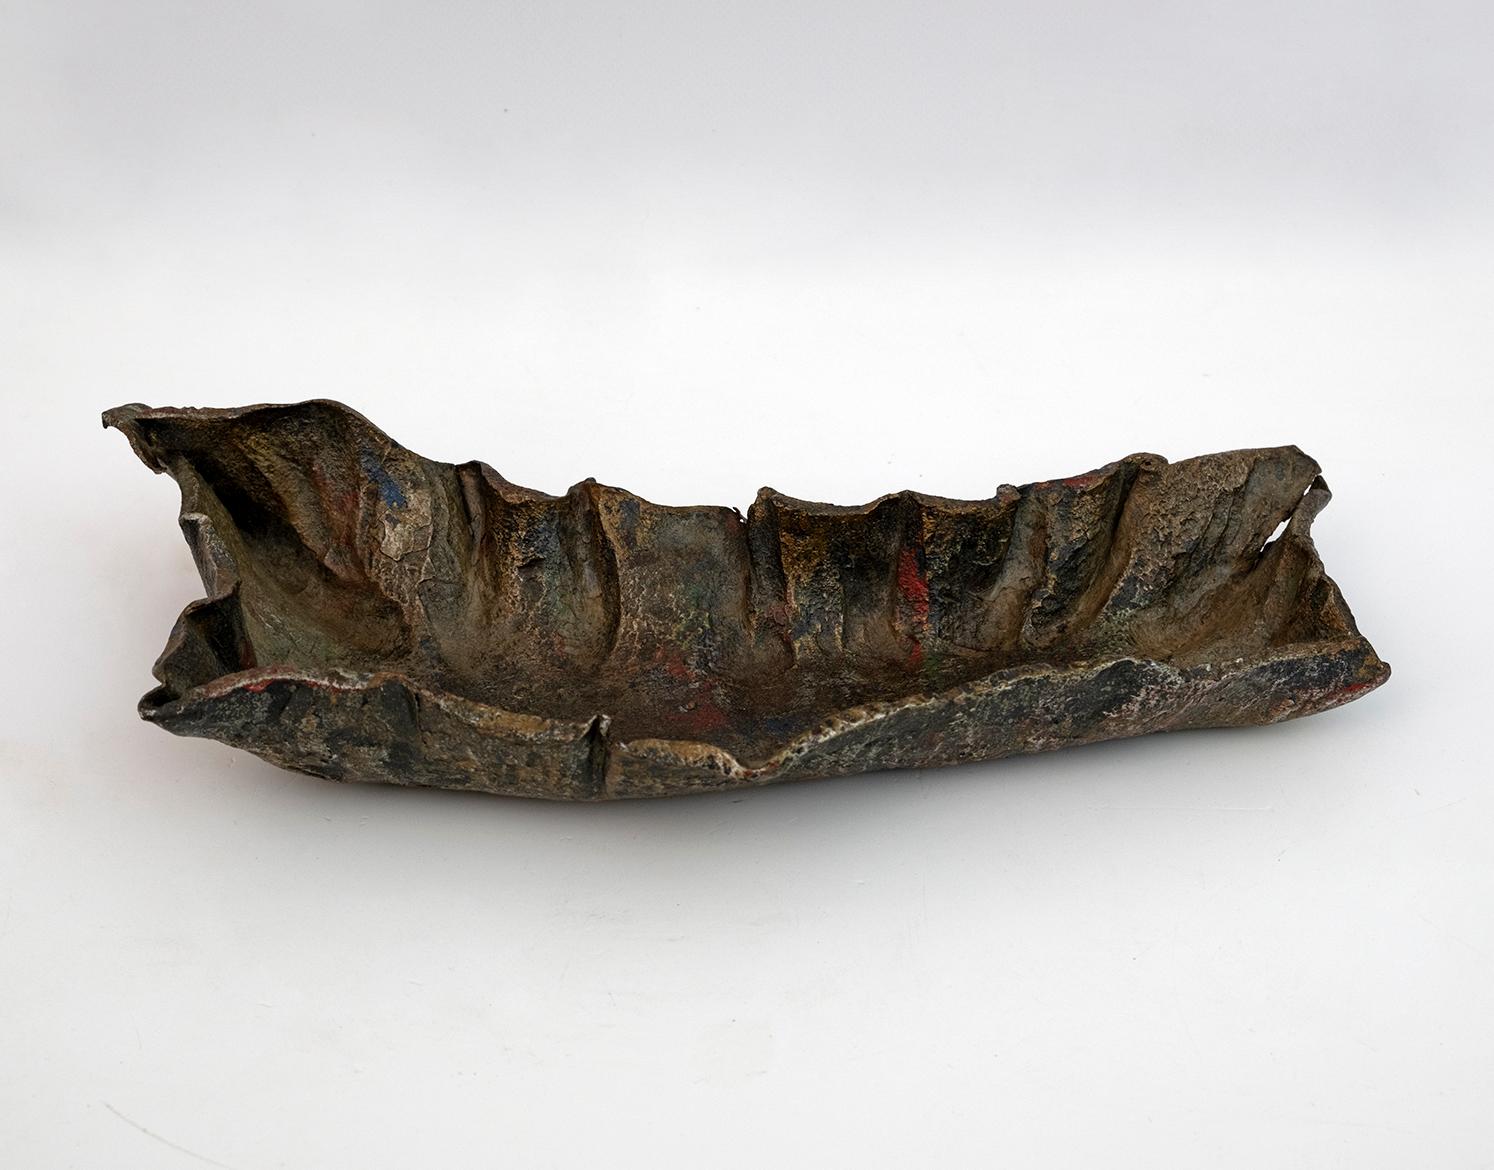 One-of-a-kind brutalist and sculptural coin tray, designed and built in Italy in the 1970s by the Italian sculptor Salvino Marsura.
In hand-forged iron, silver patinated with camouflage touches.
This artistic centerpiece is signed by the artist and